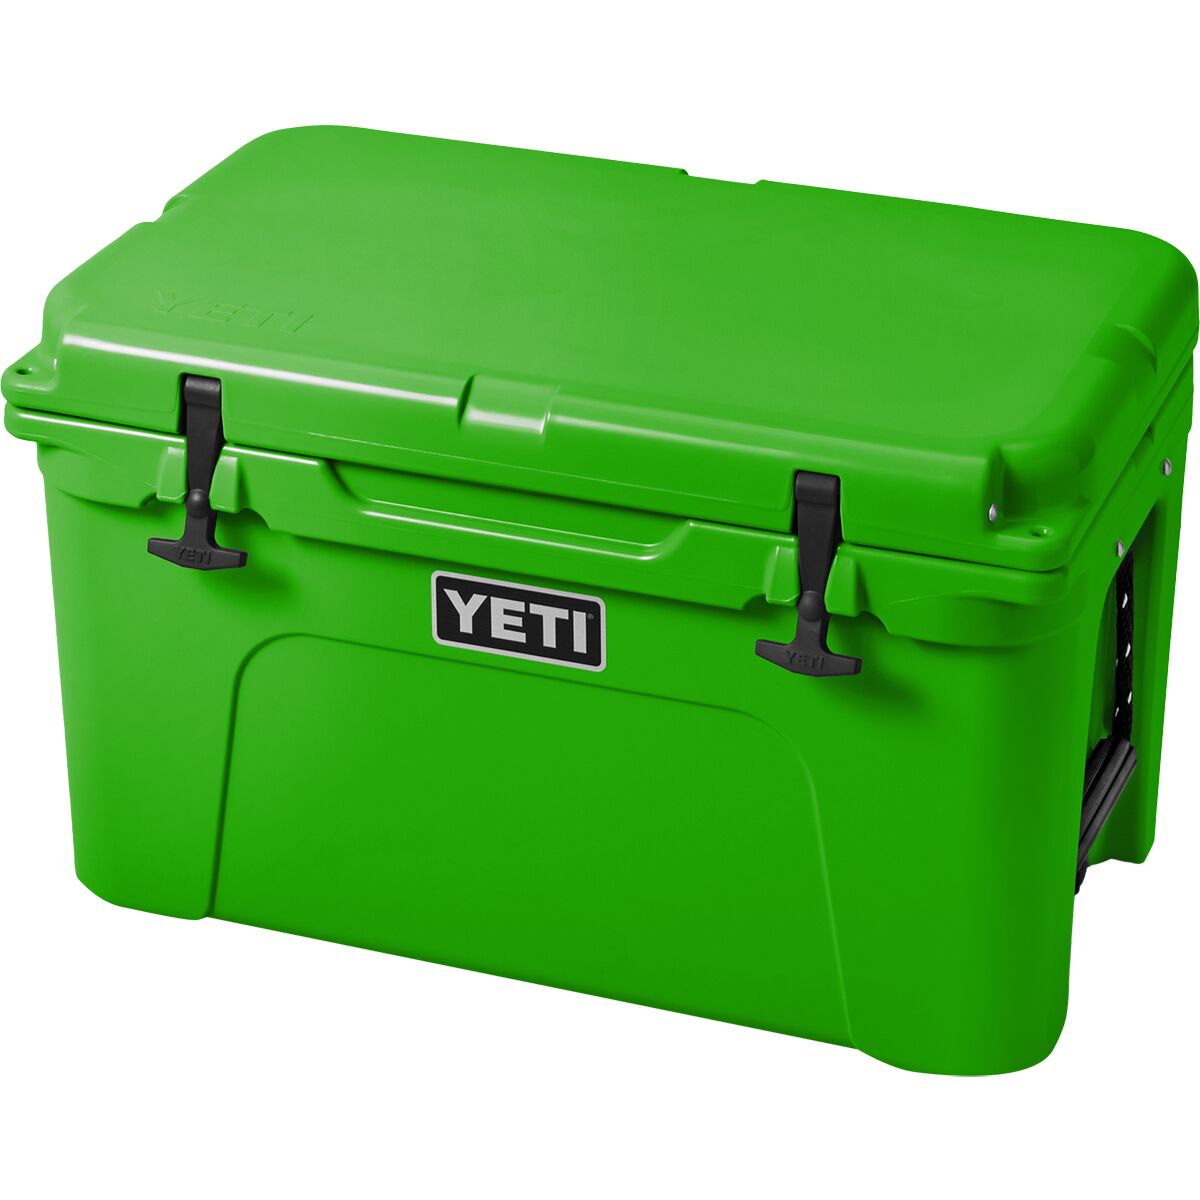 YETI Tundra 45 Insulated Chest Cooler, Tan at